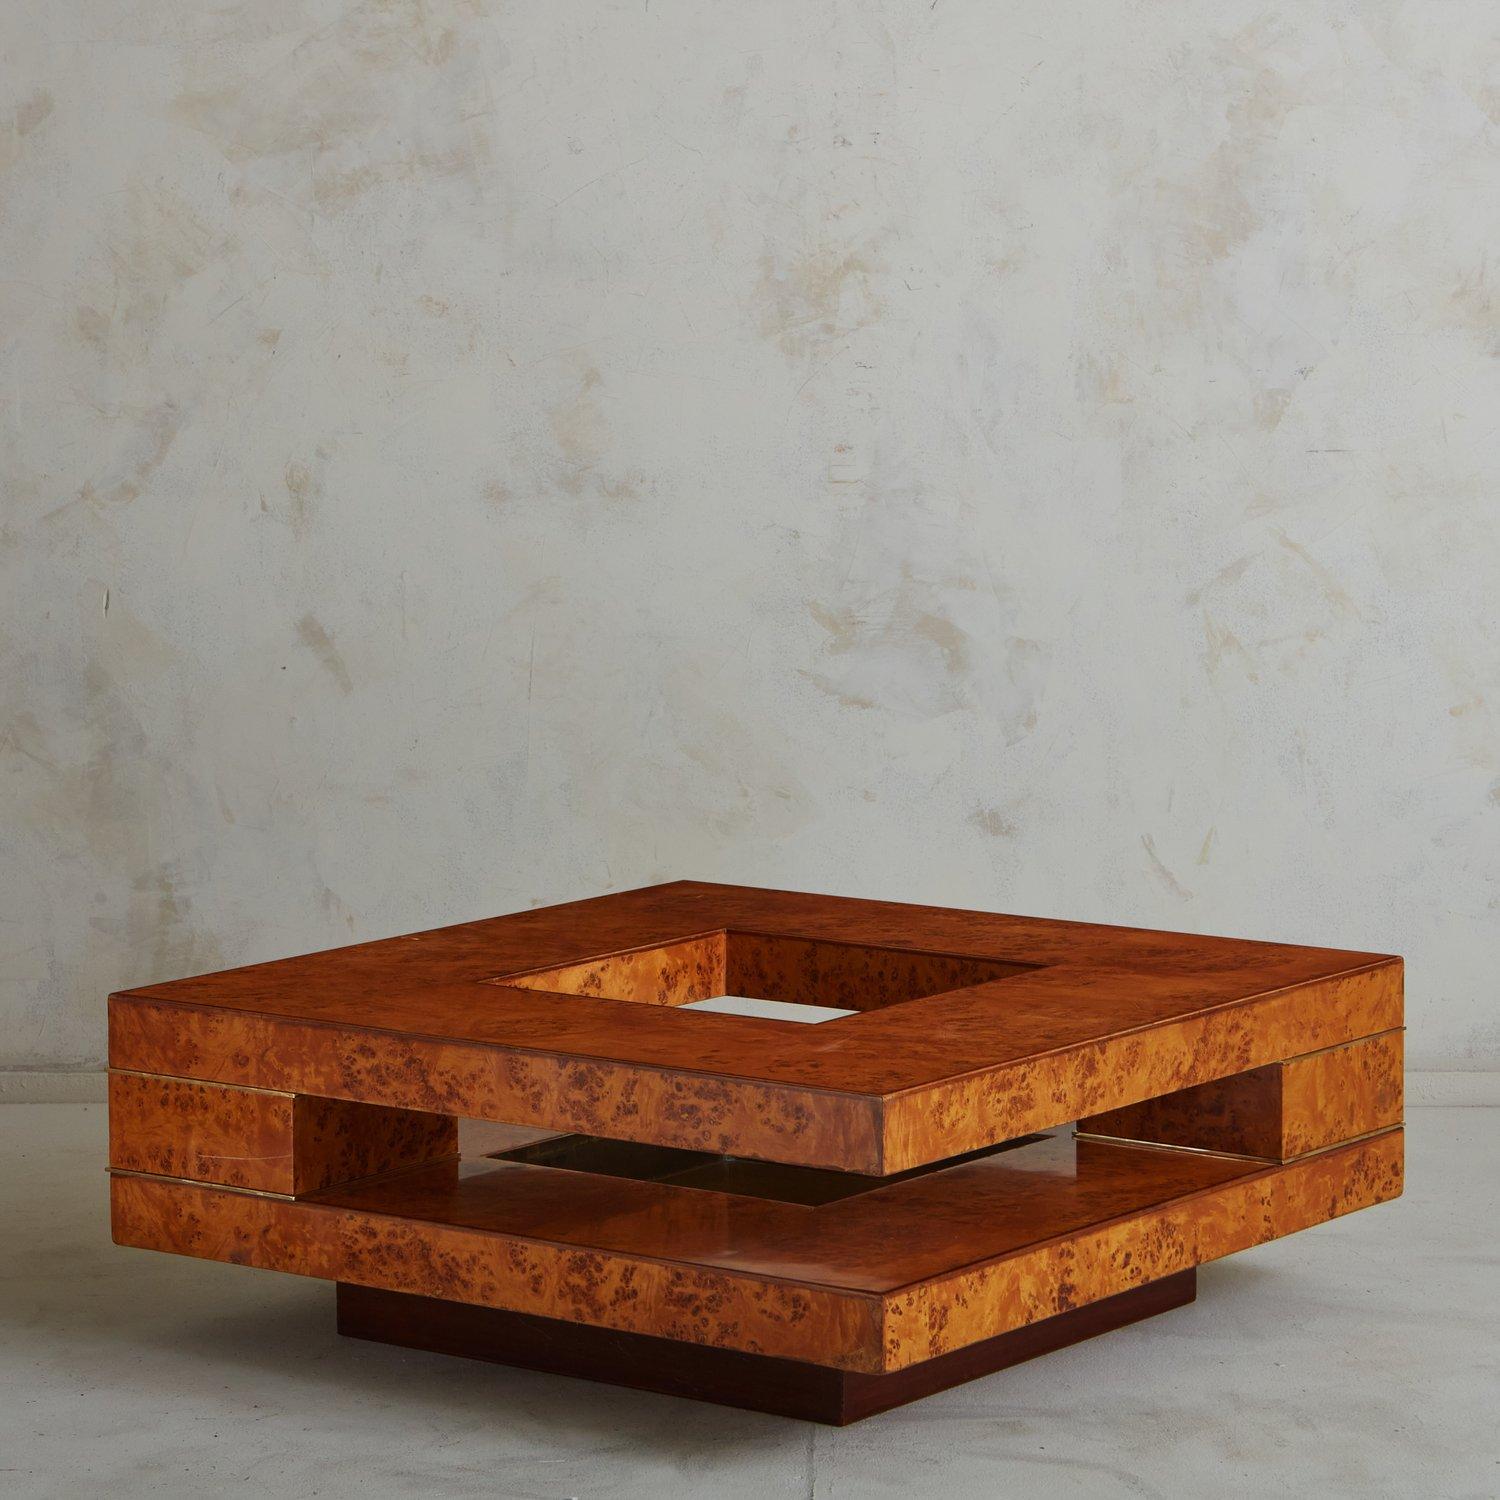 A sculptural 1970s coffee table attributed to Willy Rizzo. This table features a lacquered burl wood veneer with beautiful graining and subtle brass detailing. It has a two-tier top with cutout details along the sides and top, perfect for styling